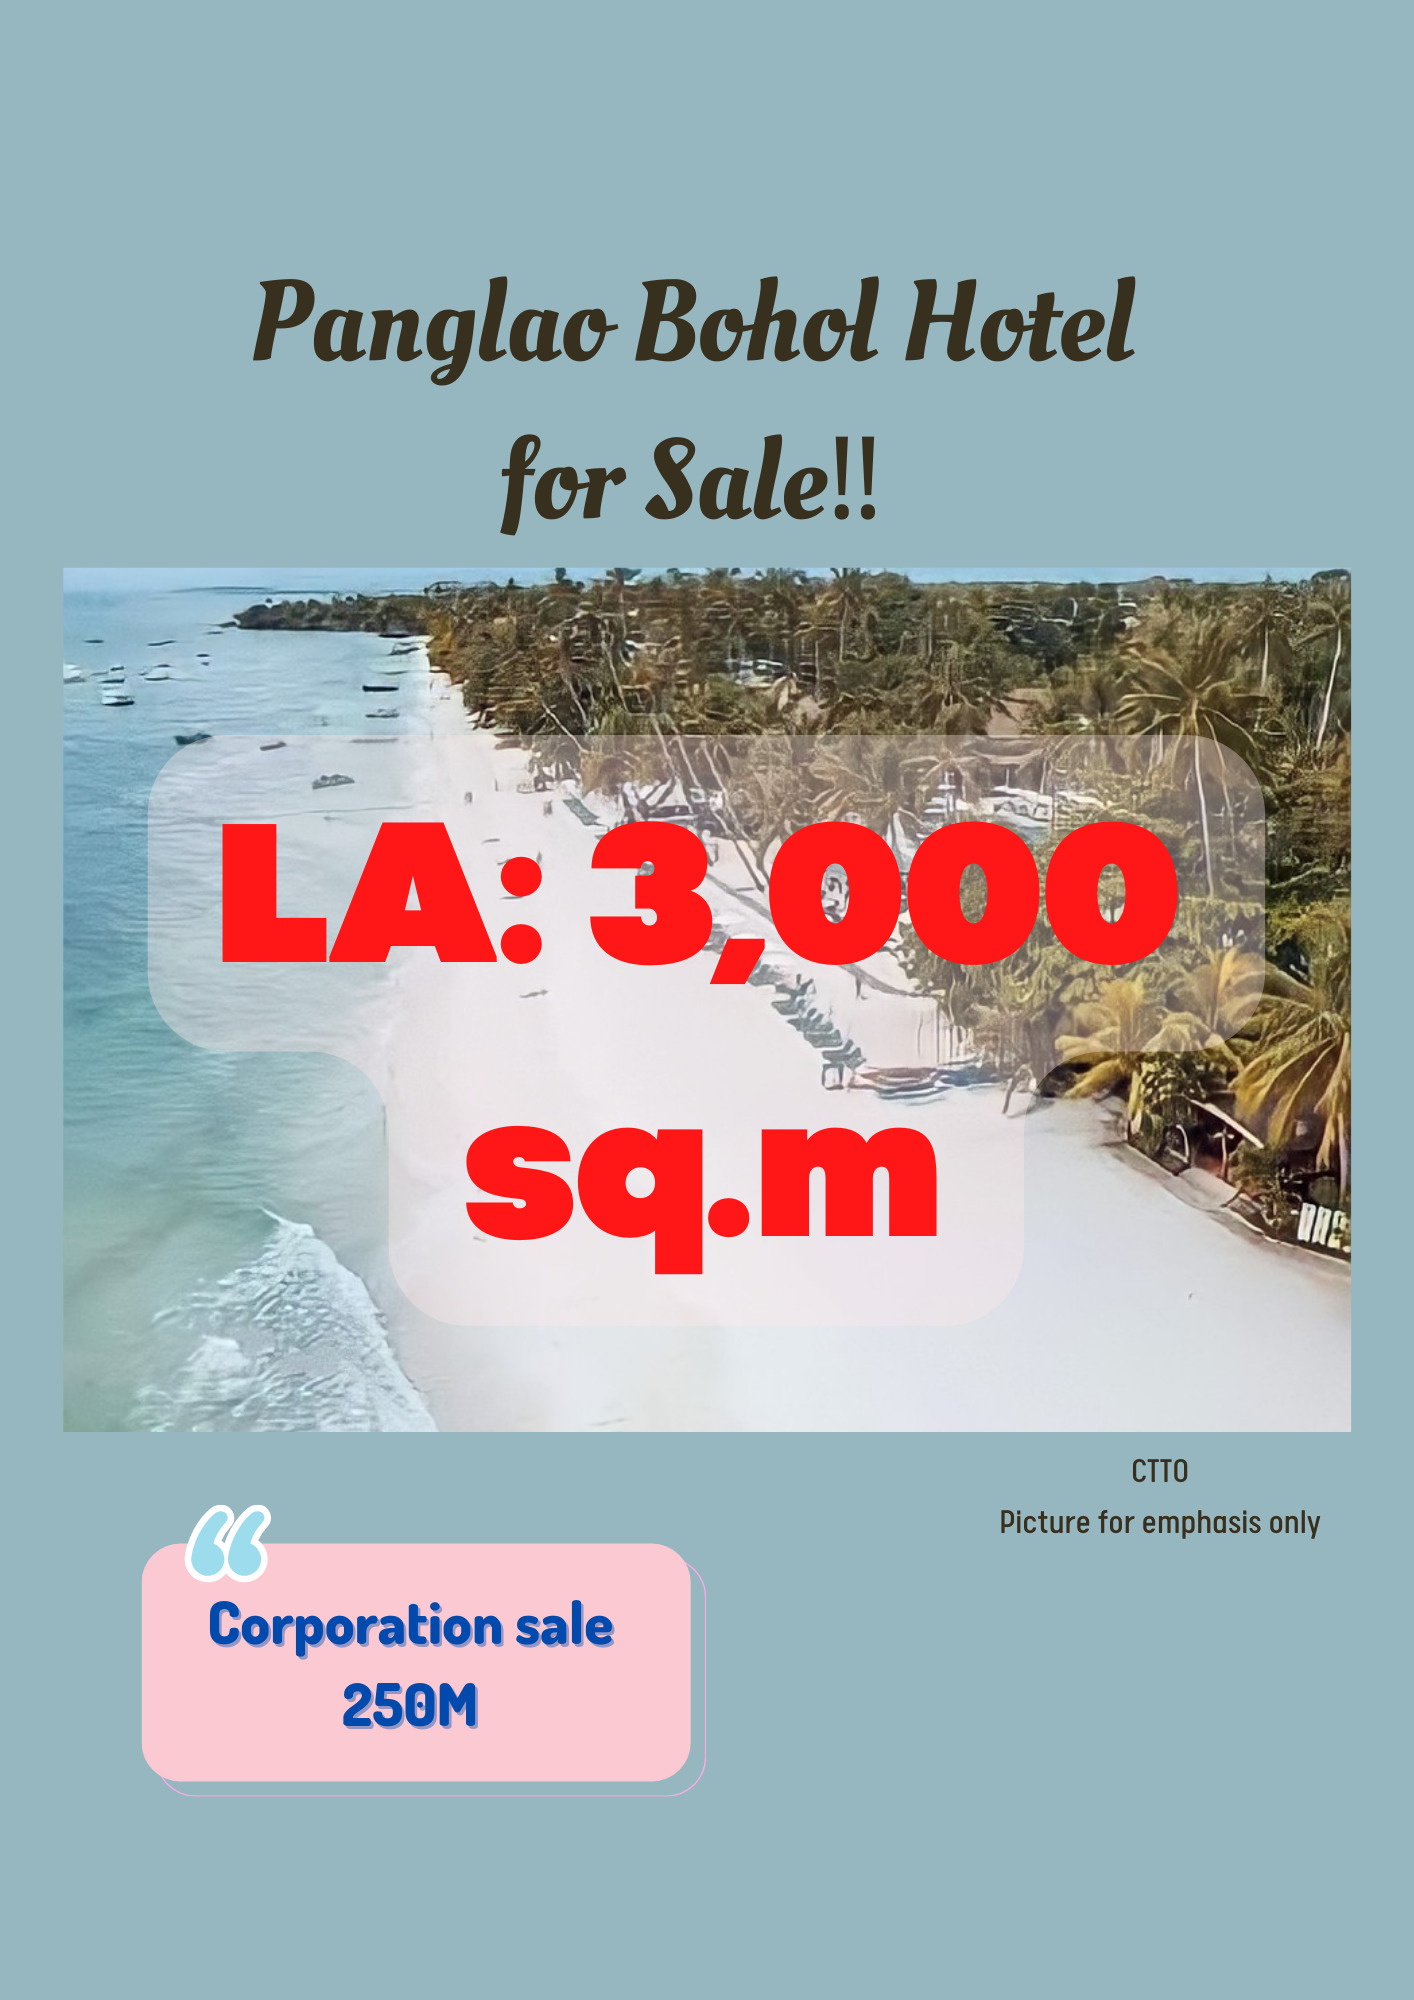 Panglao Bohol Hotel for Sale 2  star Boutique Hotel‼️